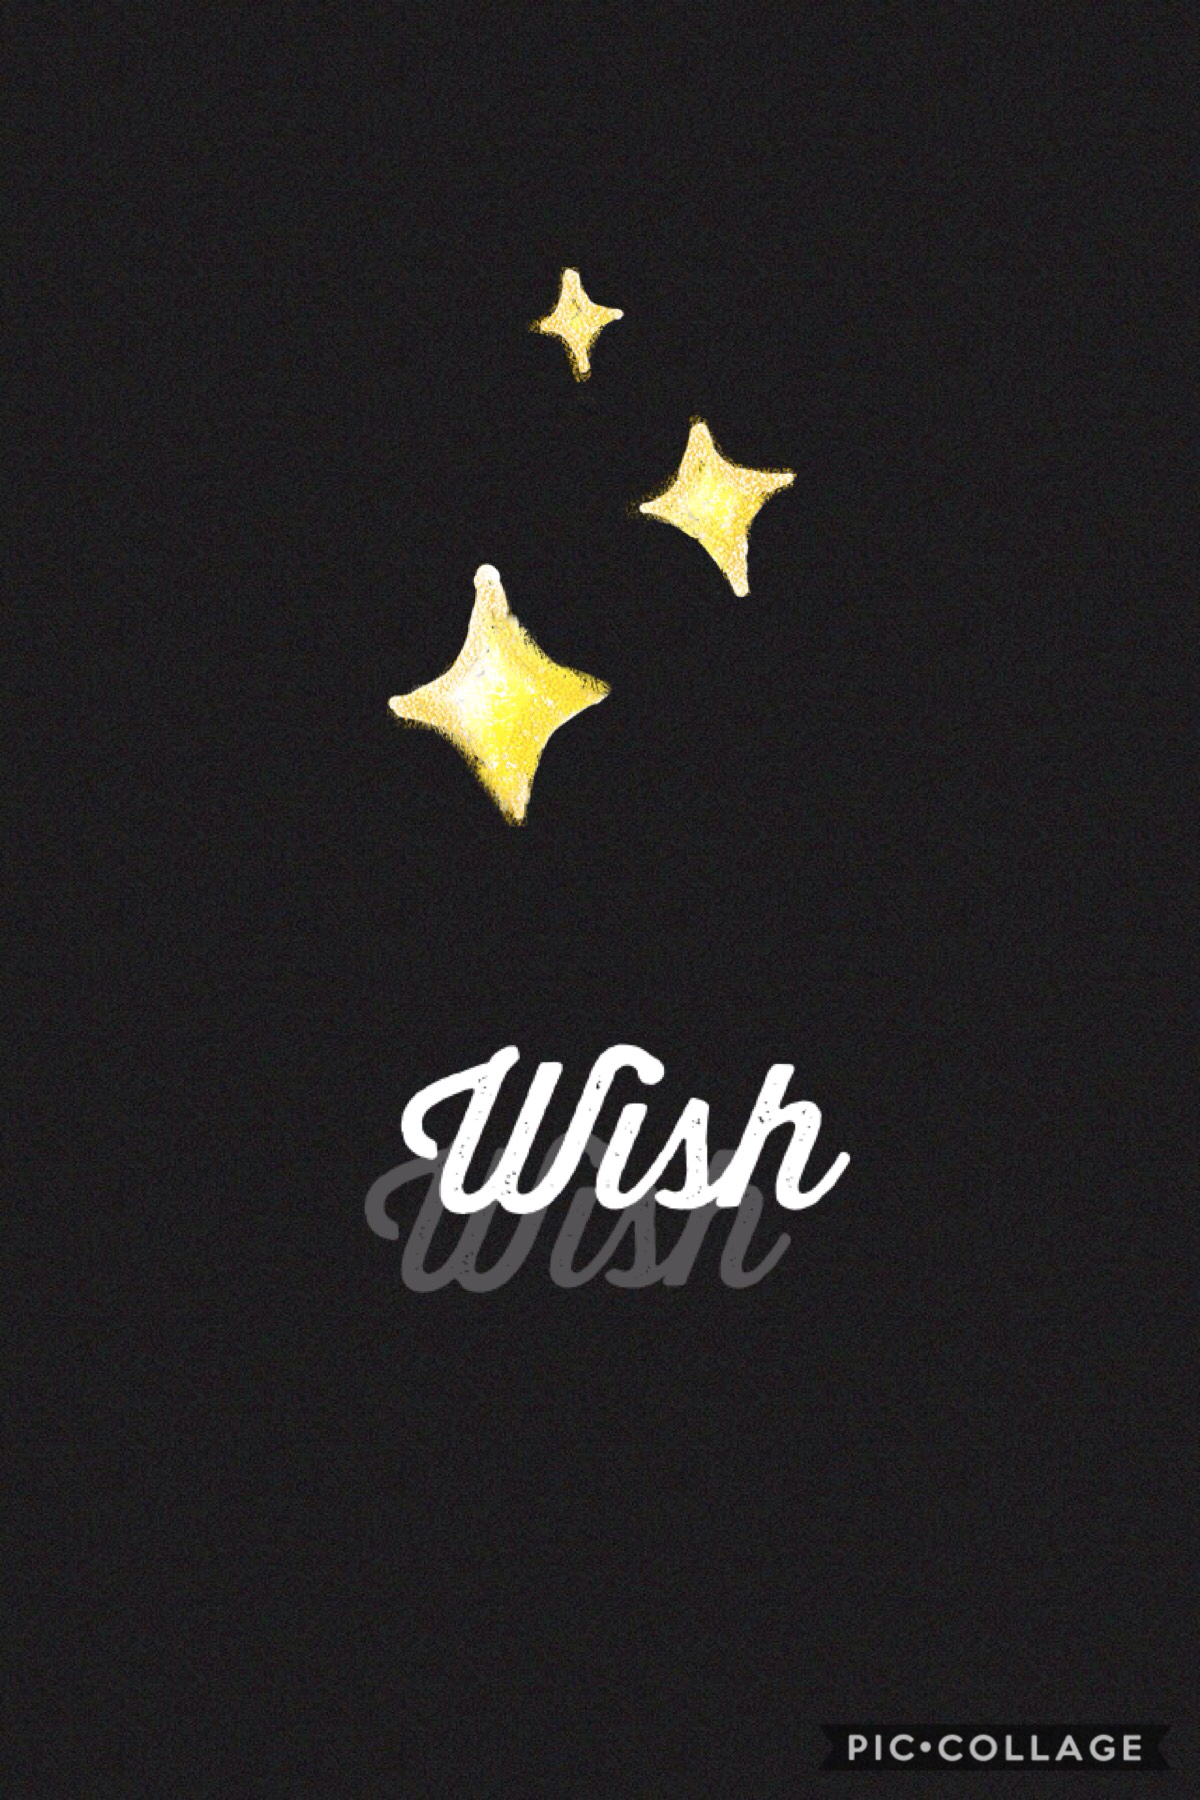 Wish upon a star
